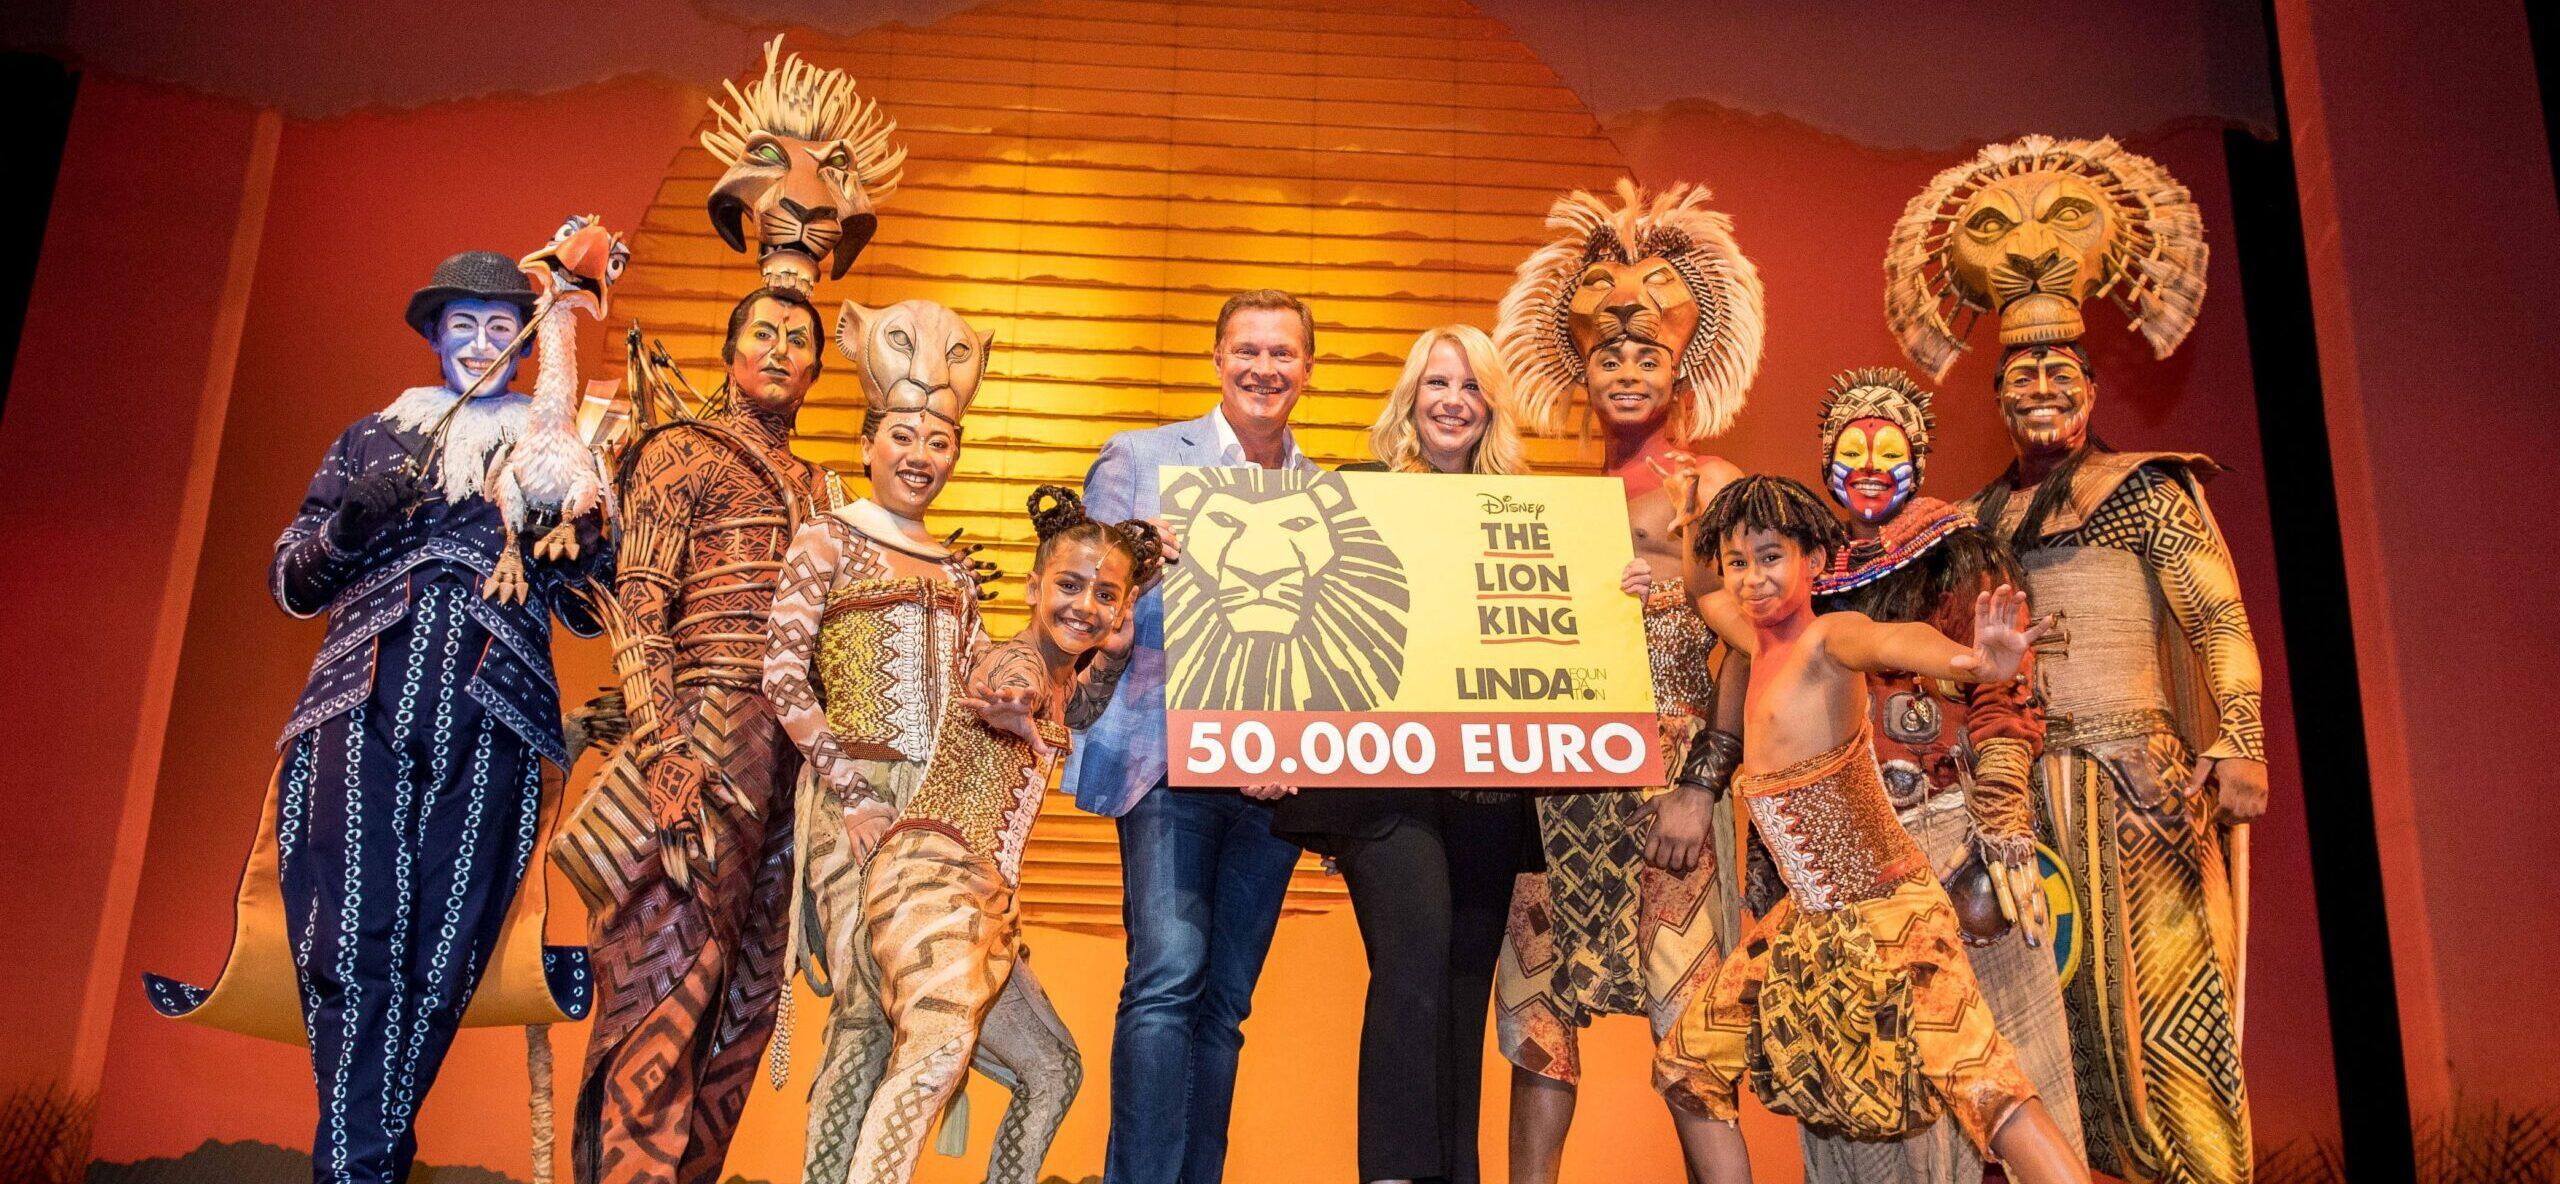 Albert Verlinde and Linda de Mol during the second anniversary of The Lion King